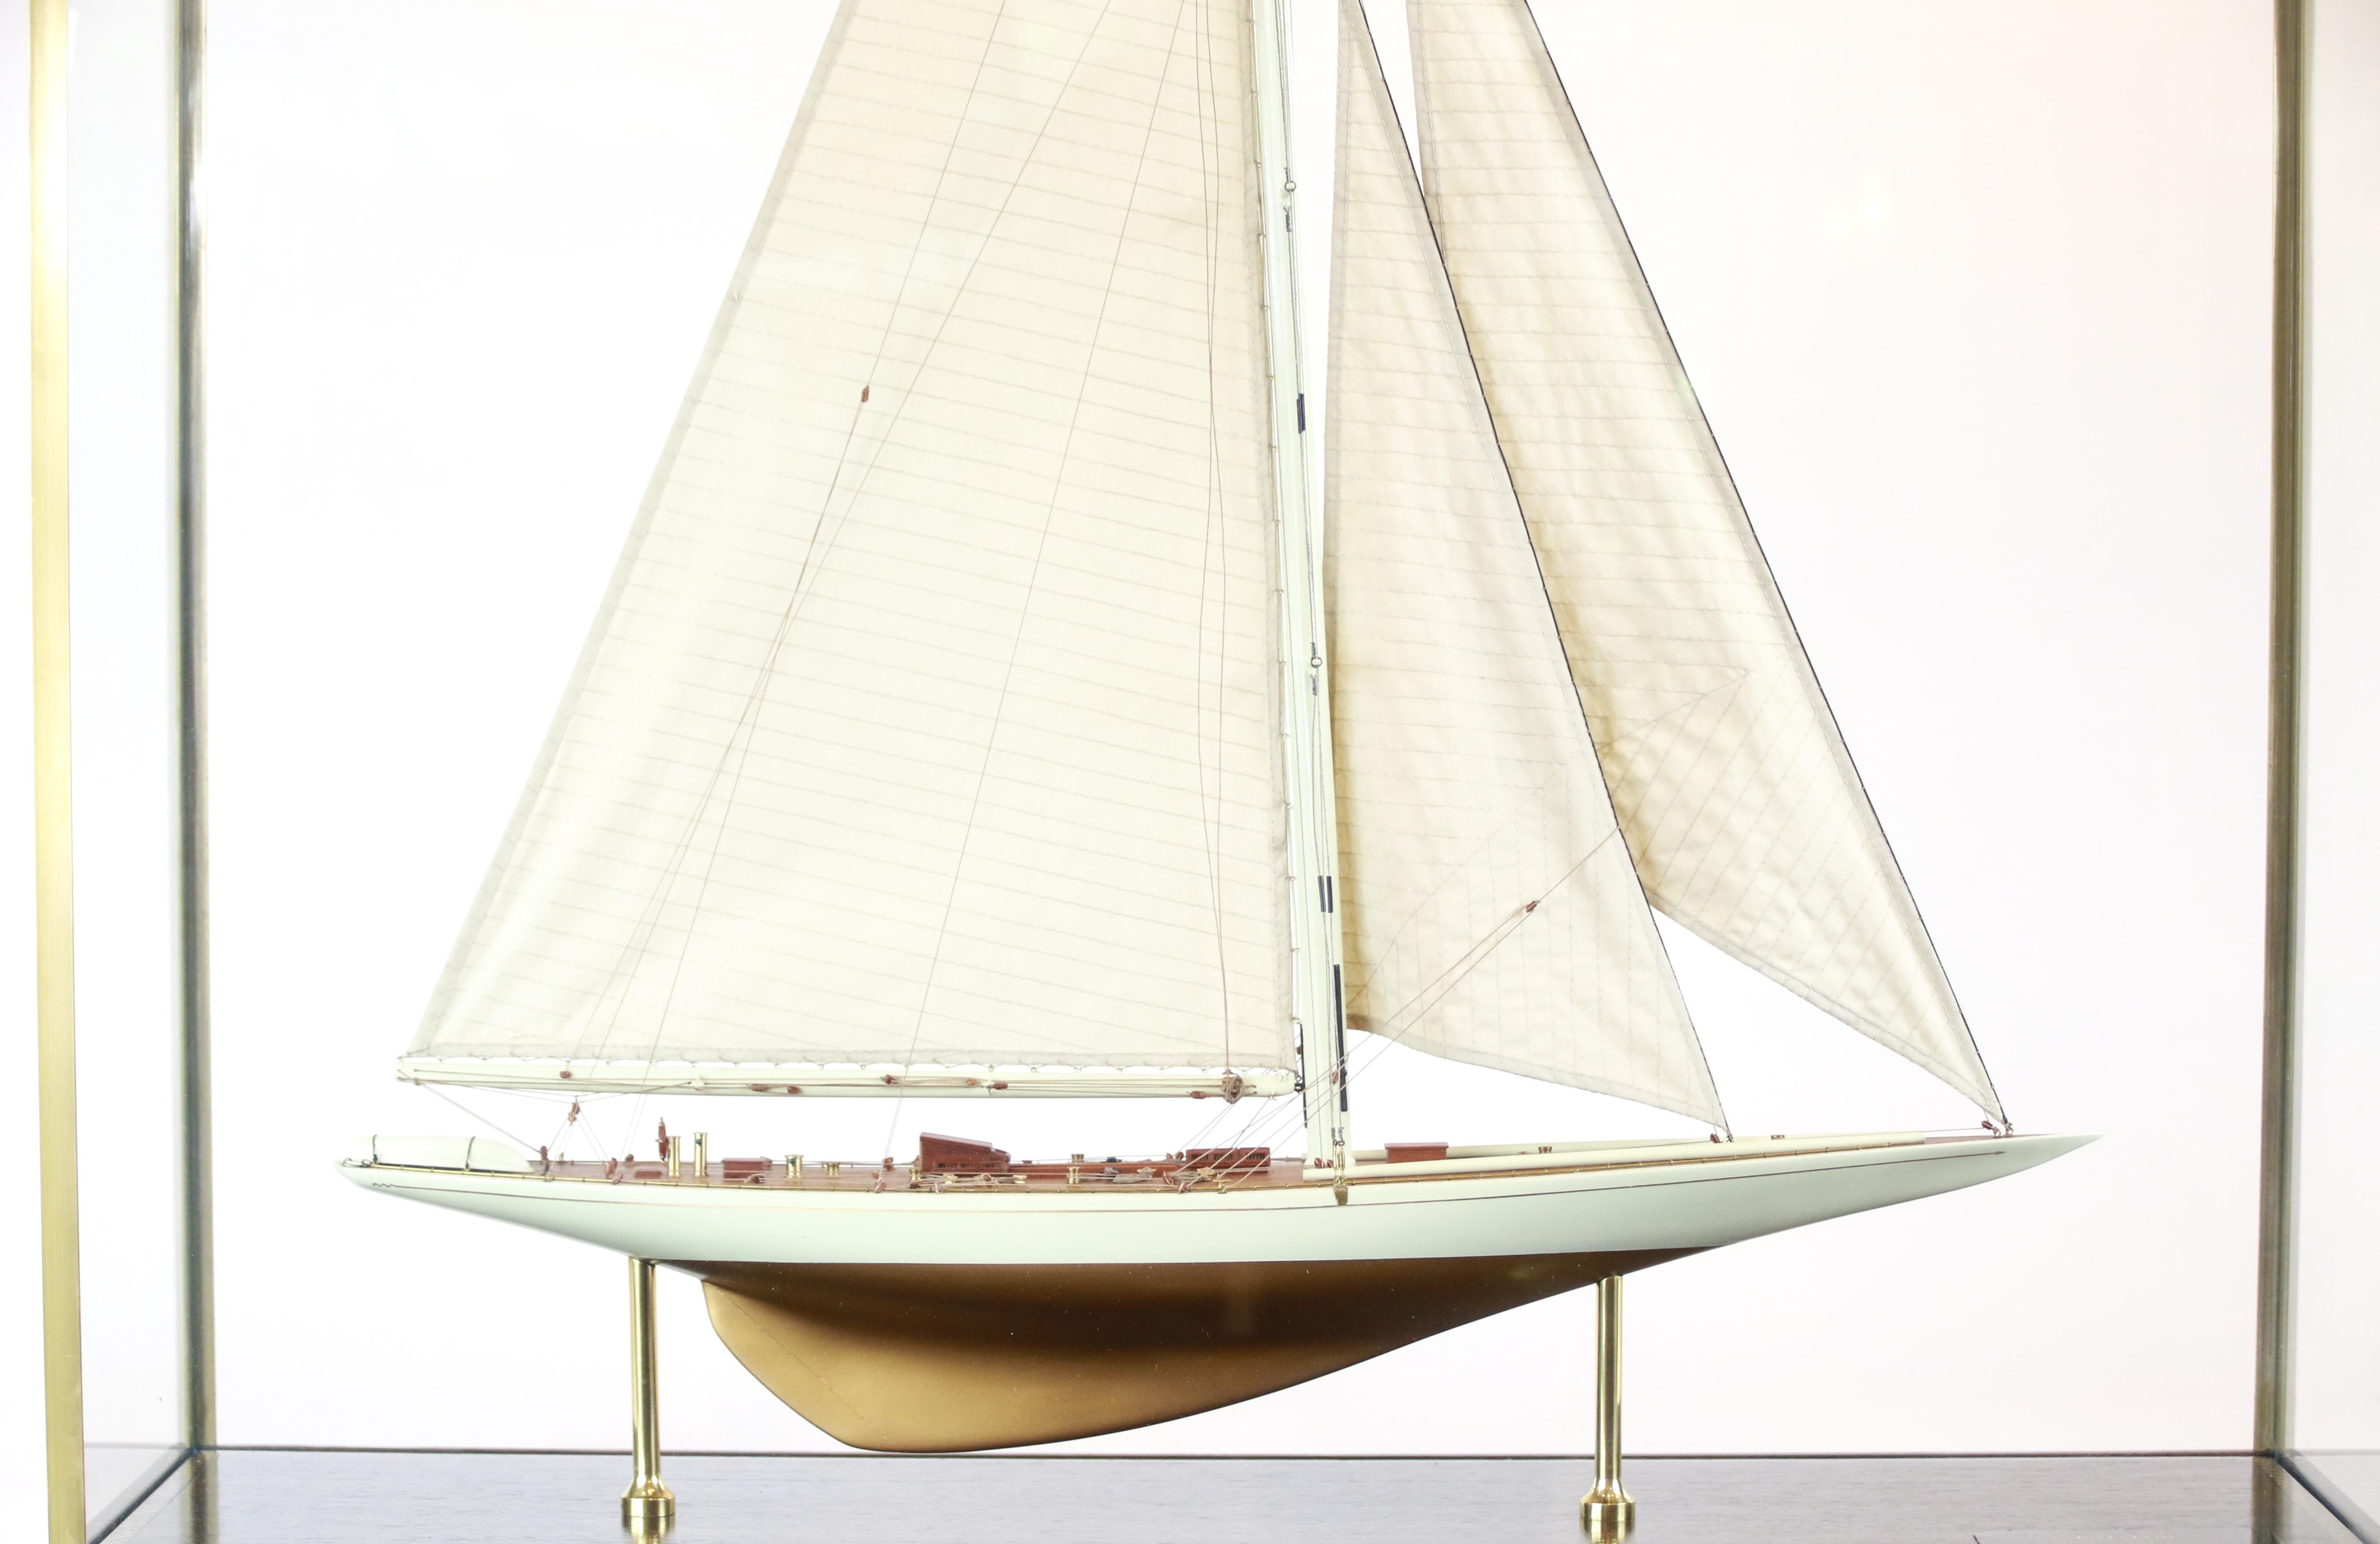 New York Yacht Club J-class sloop Rainbow model of 1934. The gold and ivory hull model is detailed with lifeboat, capstan, helm, binnacle, skylights, hatches, boom and a full suit of stitched linen sails. Rainbow is displayed in a glass and brass